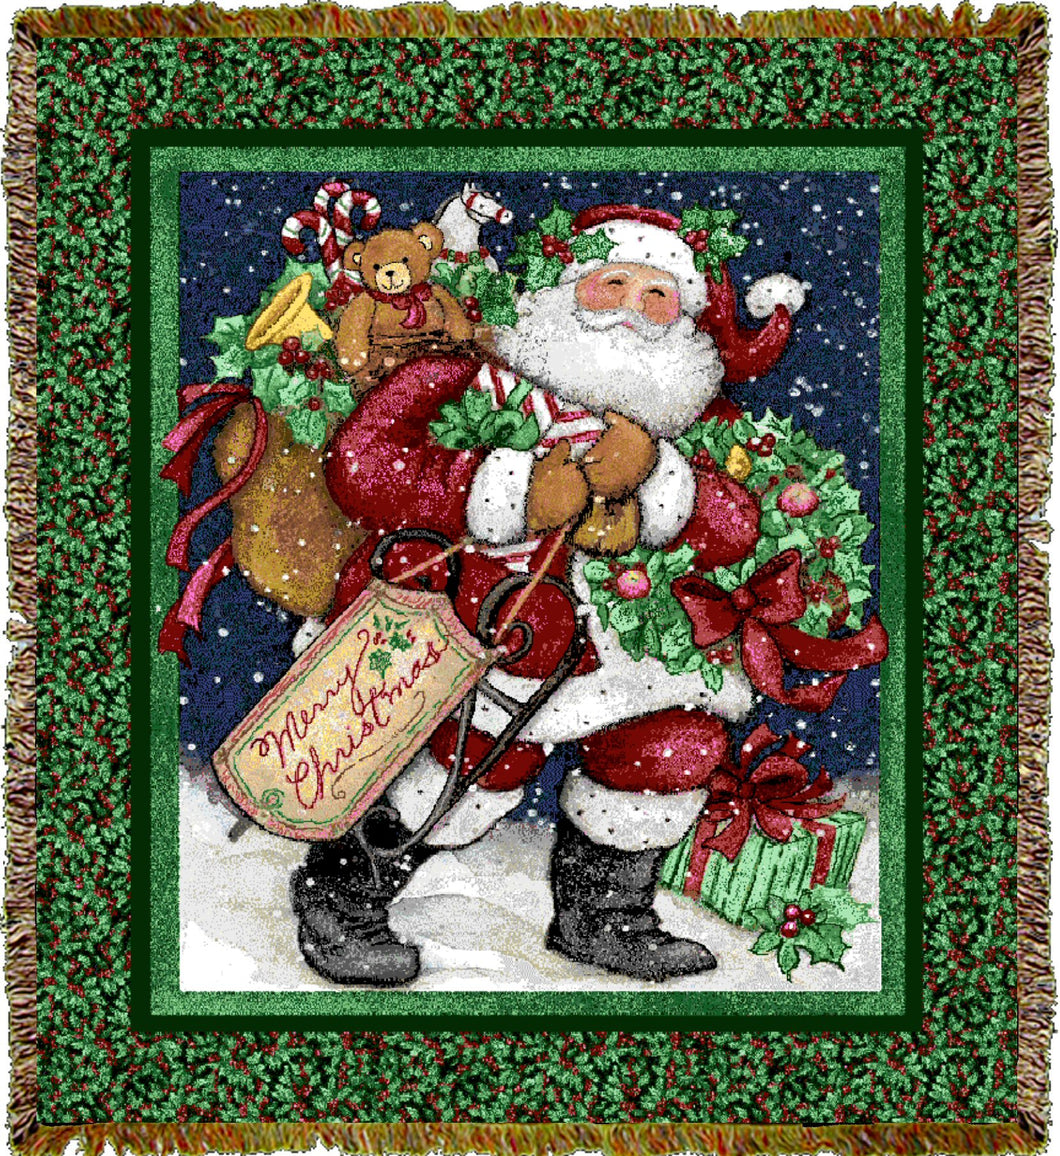 Santa with Gifts Throw Blanket